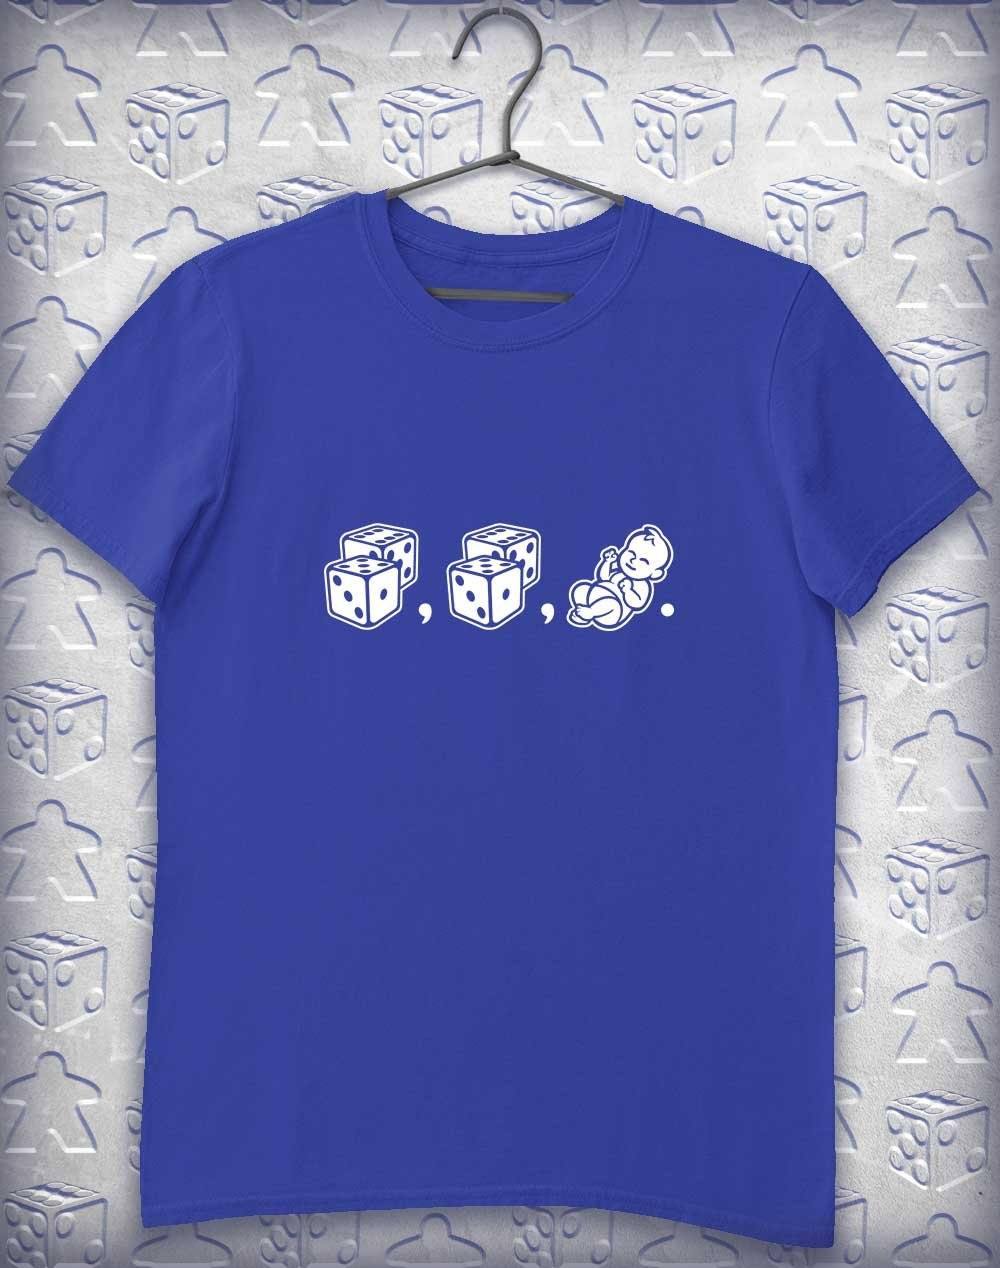 Dice Dice Baby (Plural) Alphagamer T-Shirt S / Royal  - Off World Tees